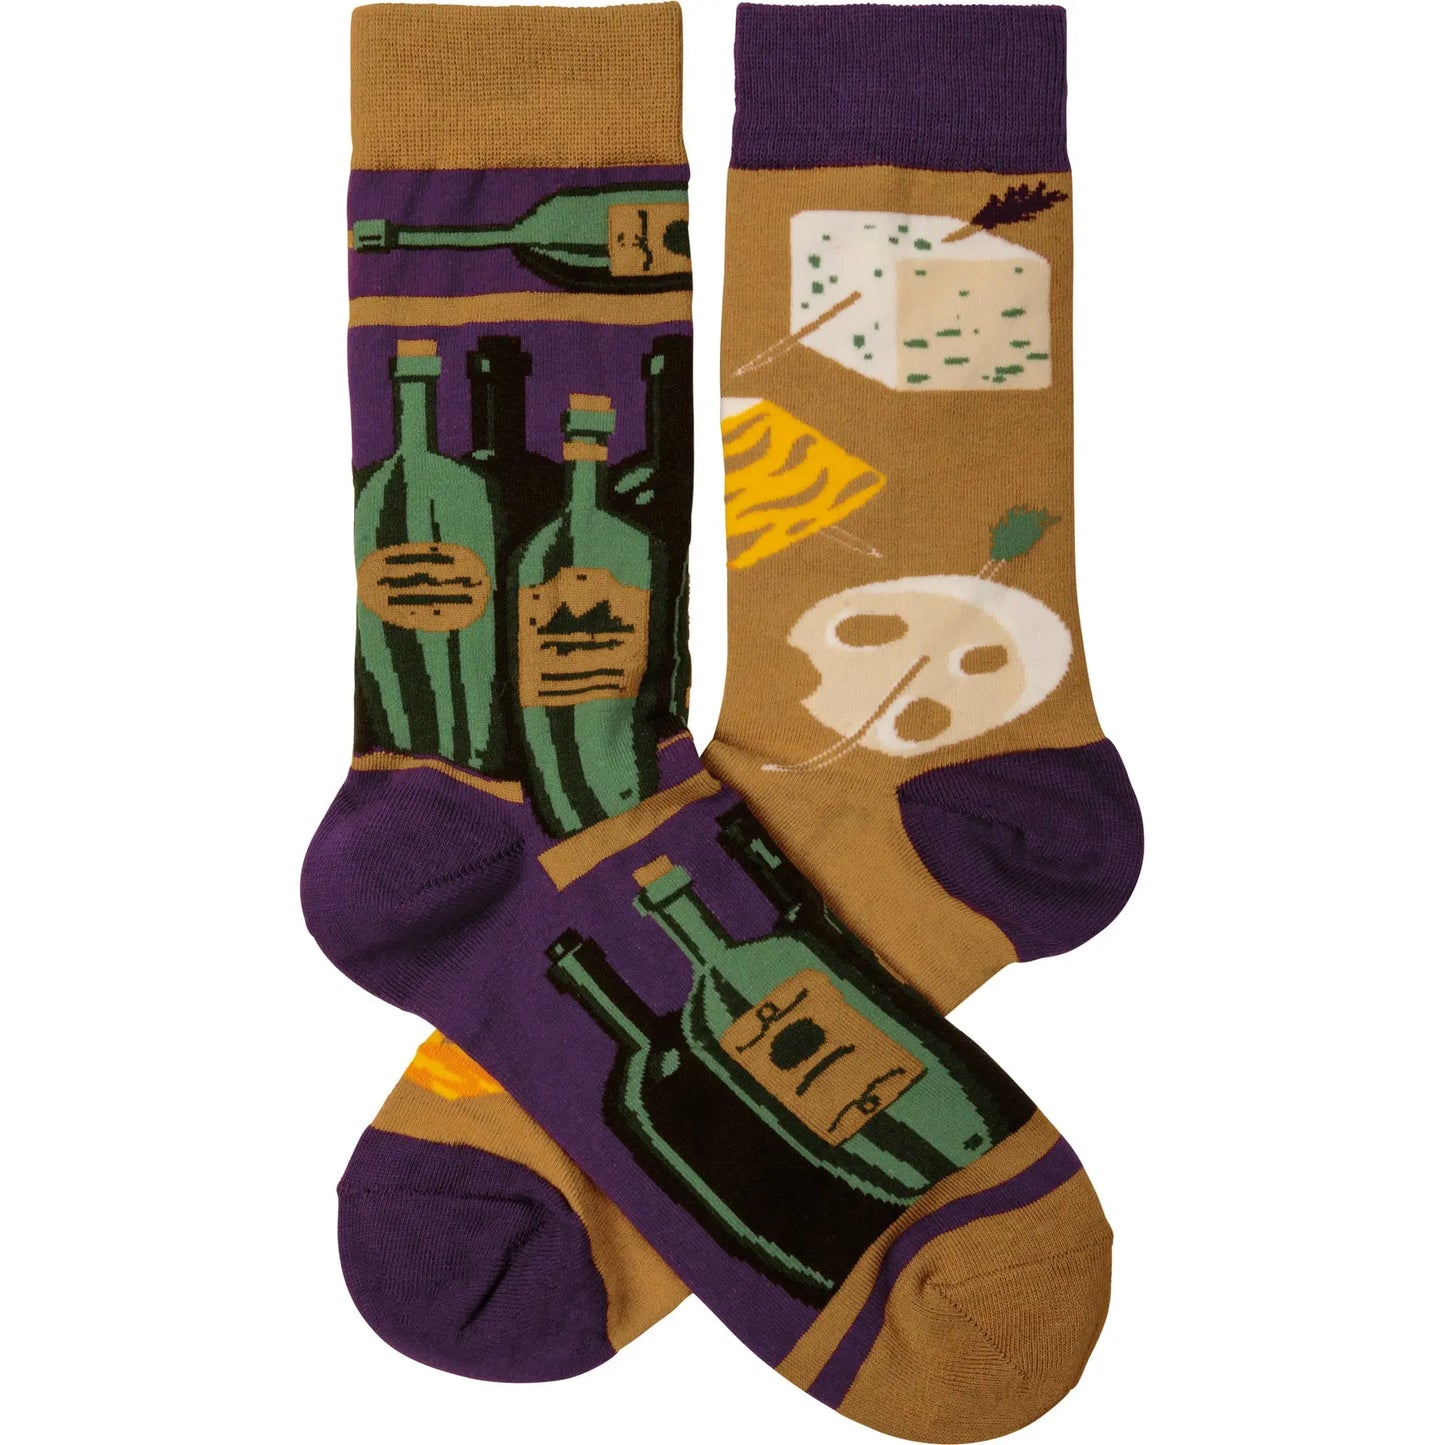 Primitives By Kathy - "Wine & Cheese" Socks PRIMITIVES BY KATHY